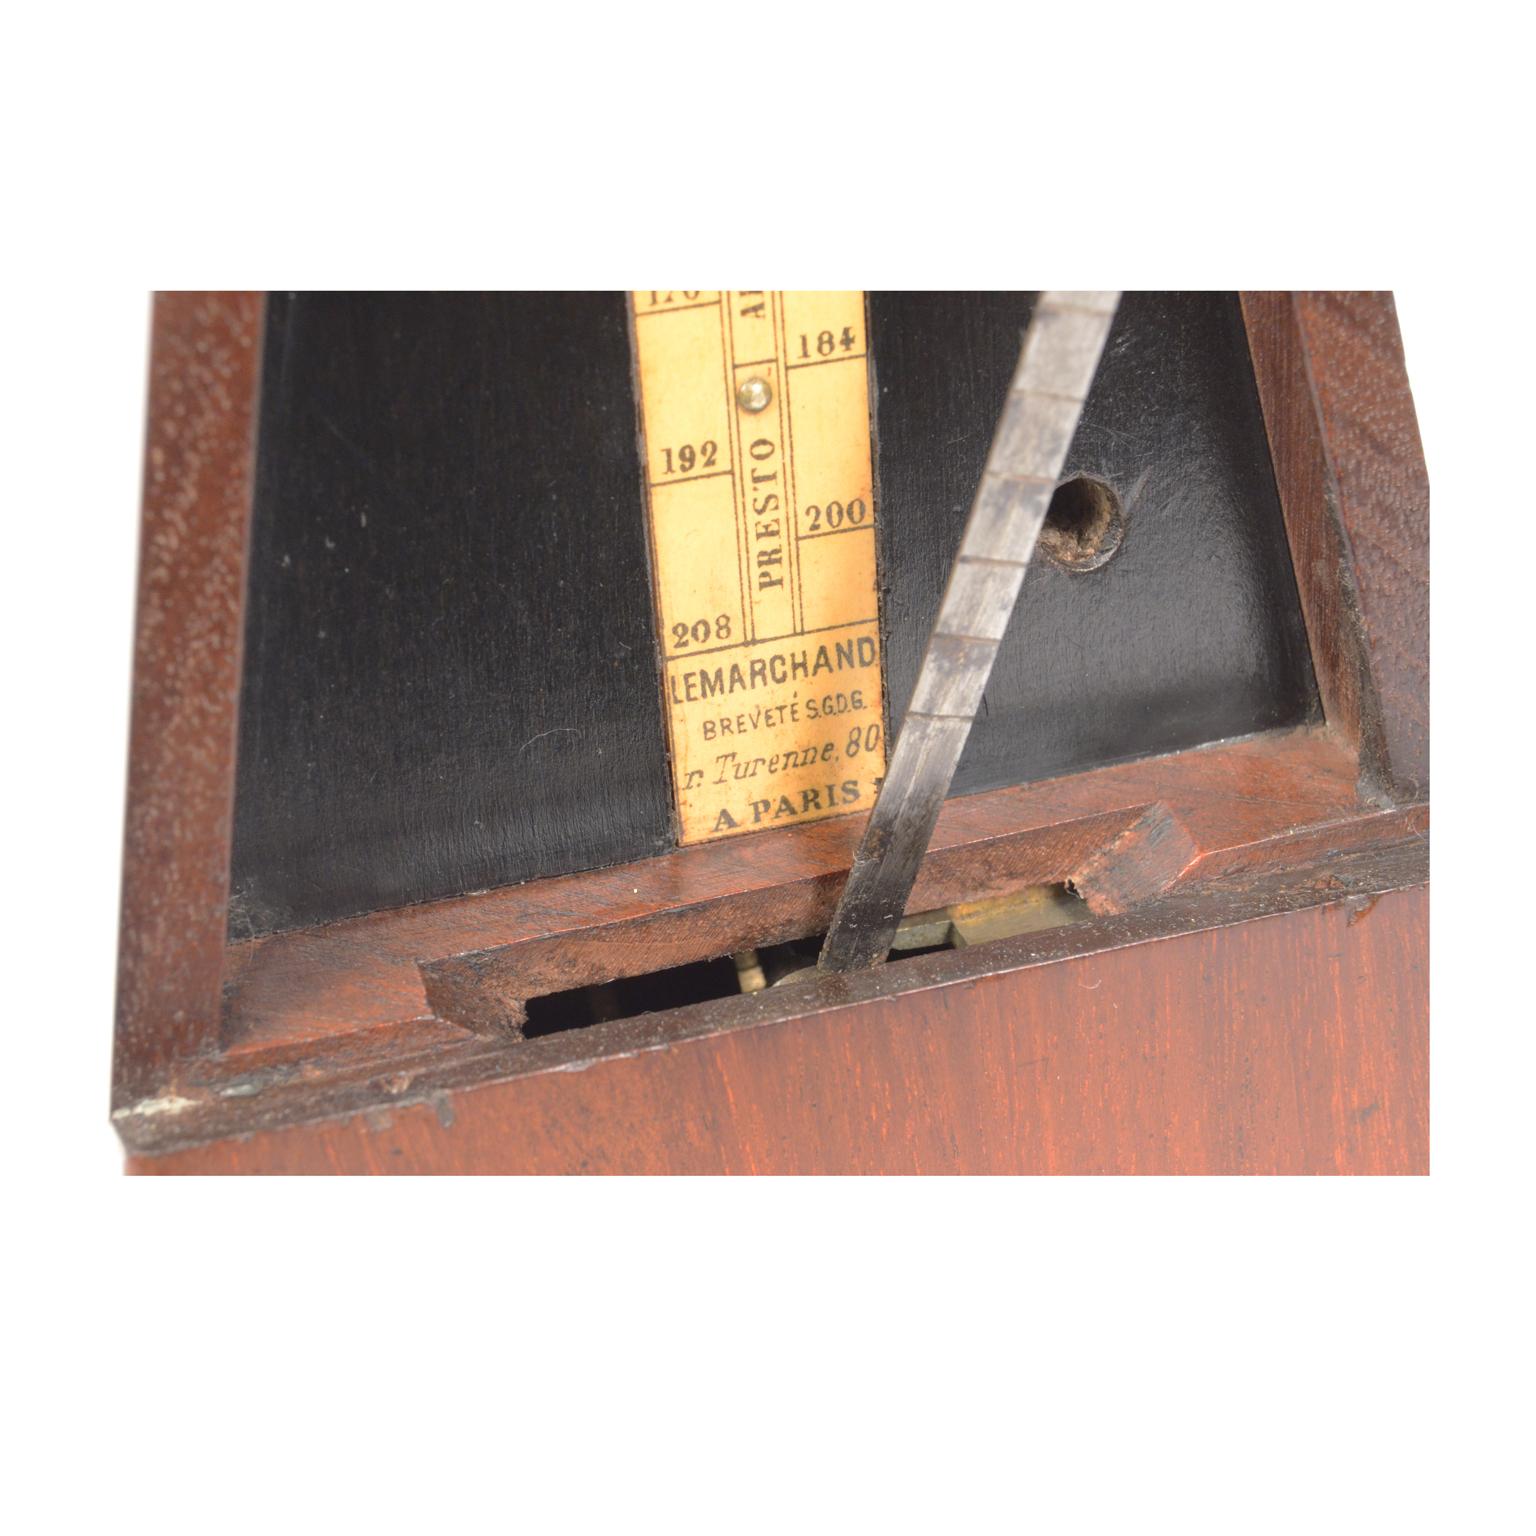 Early 20th Century Mechanical Metronome by the Maison Lemarchand Paris Early 1900s Oak Wood